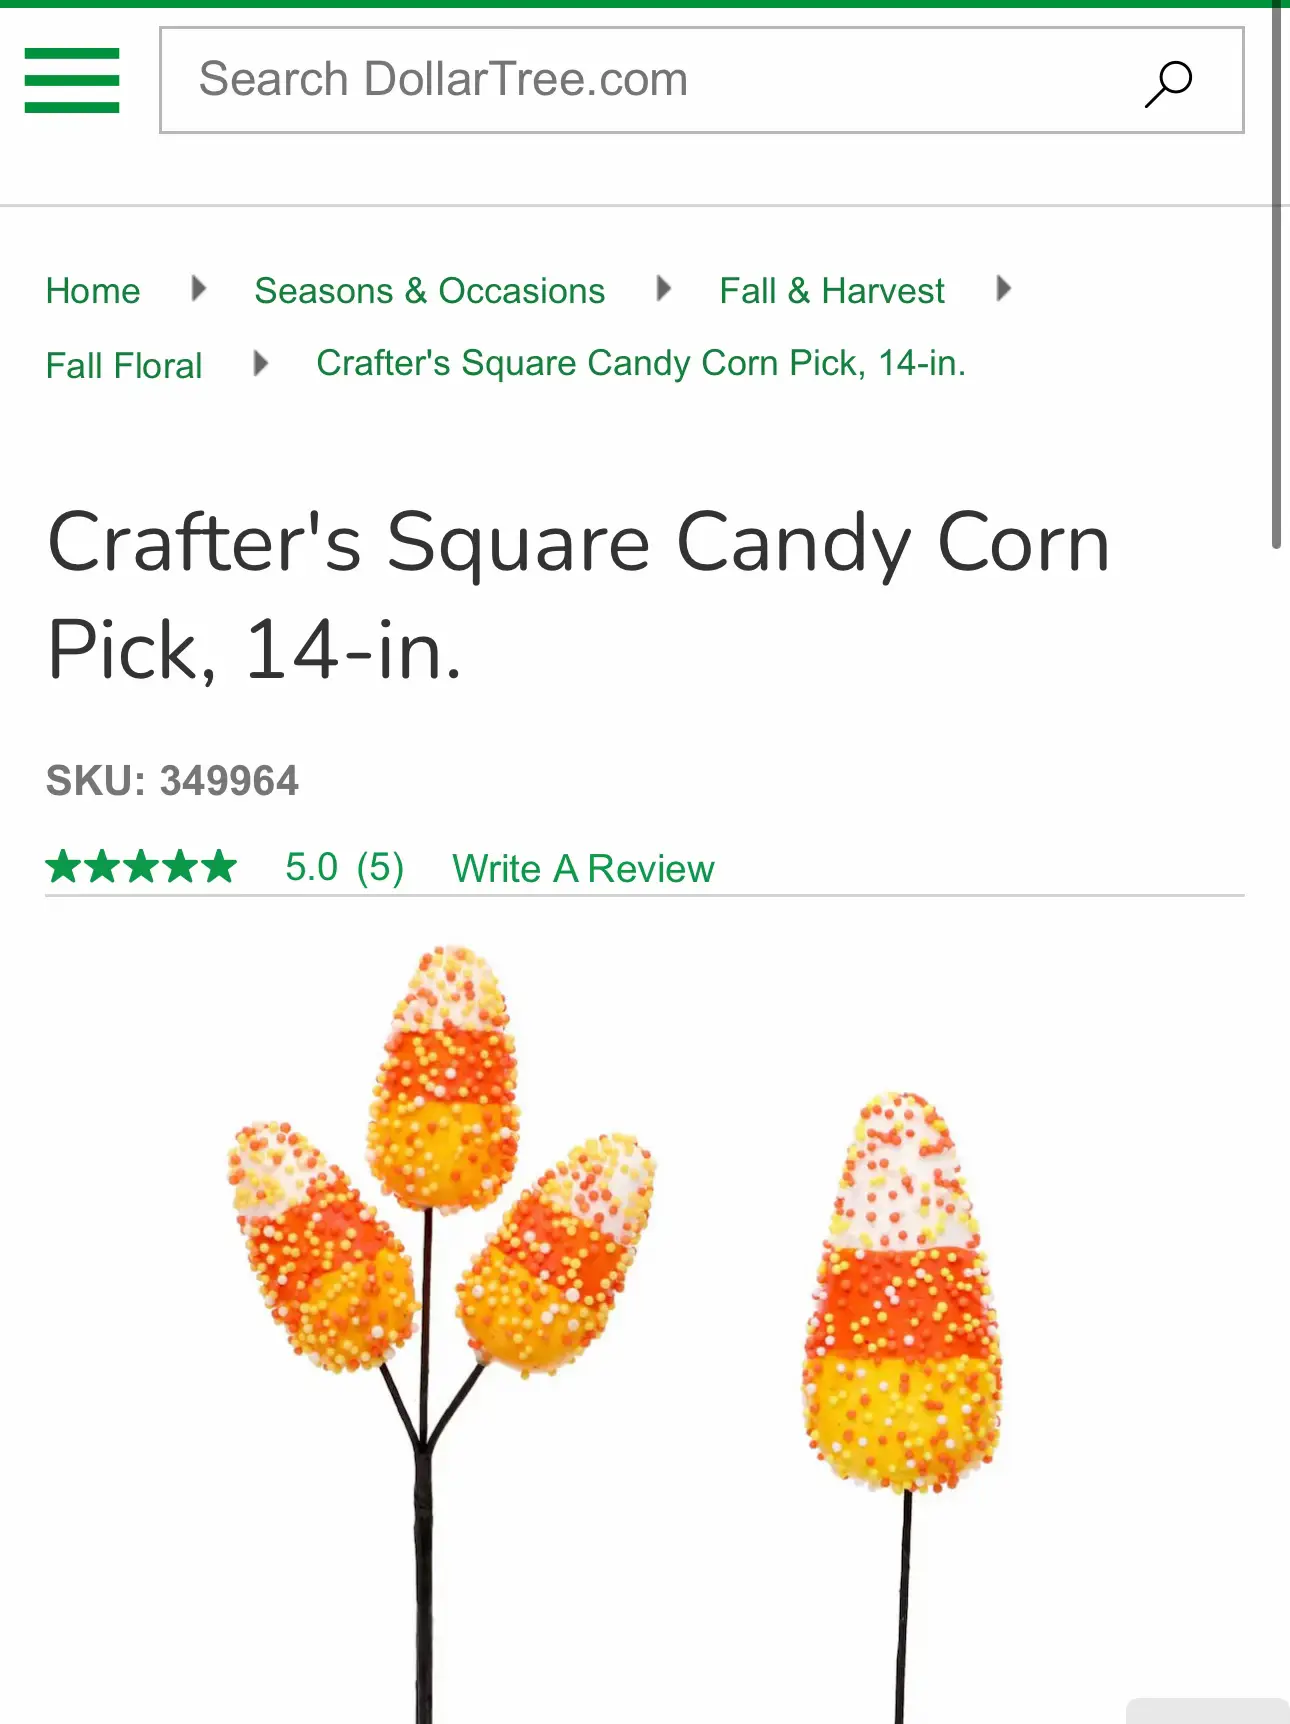 TESTING OUT & REVIEWING DOLLAR TREE CRAFTER'S SQUARE PRODUCTS